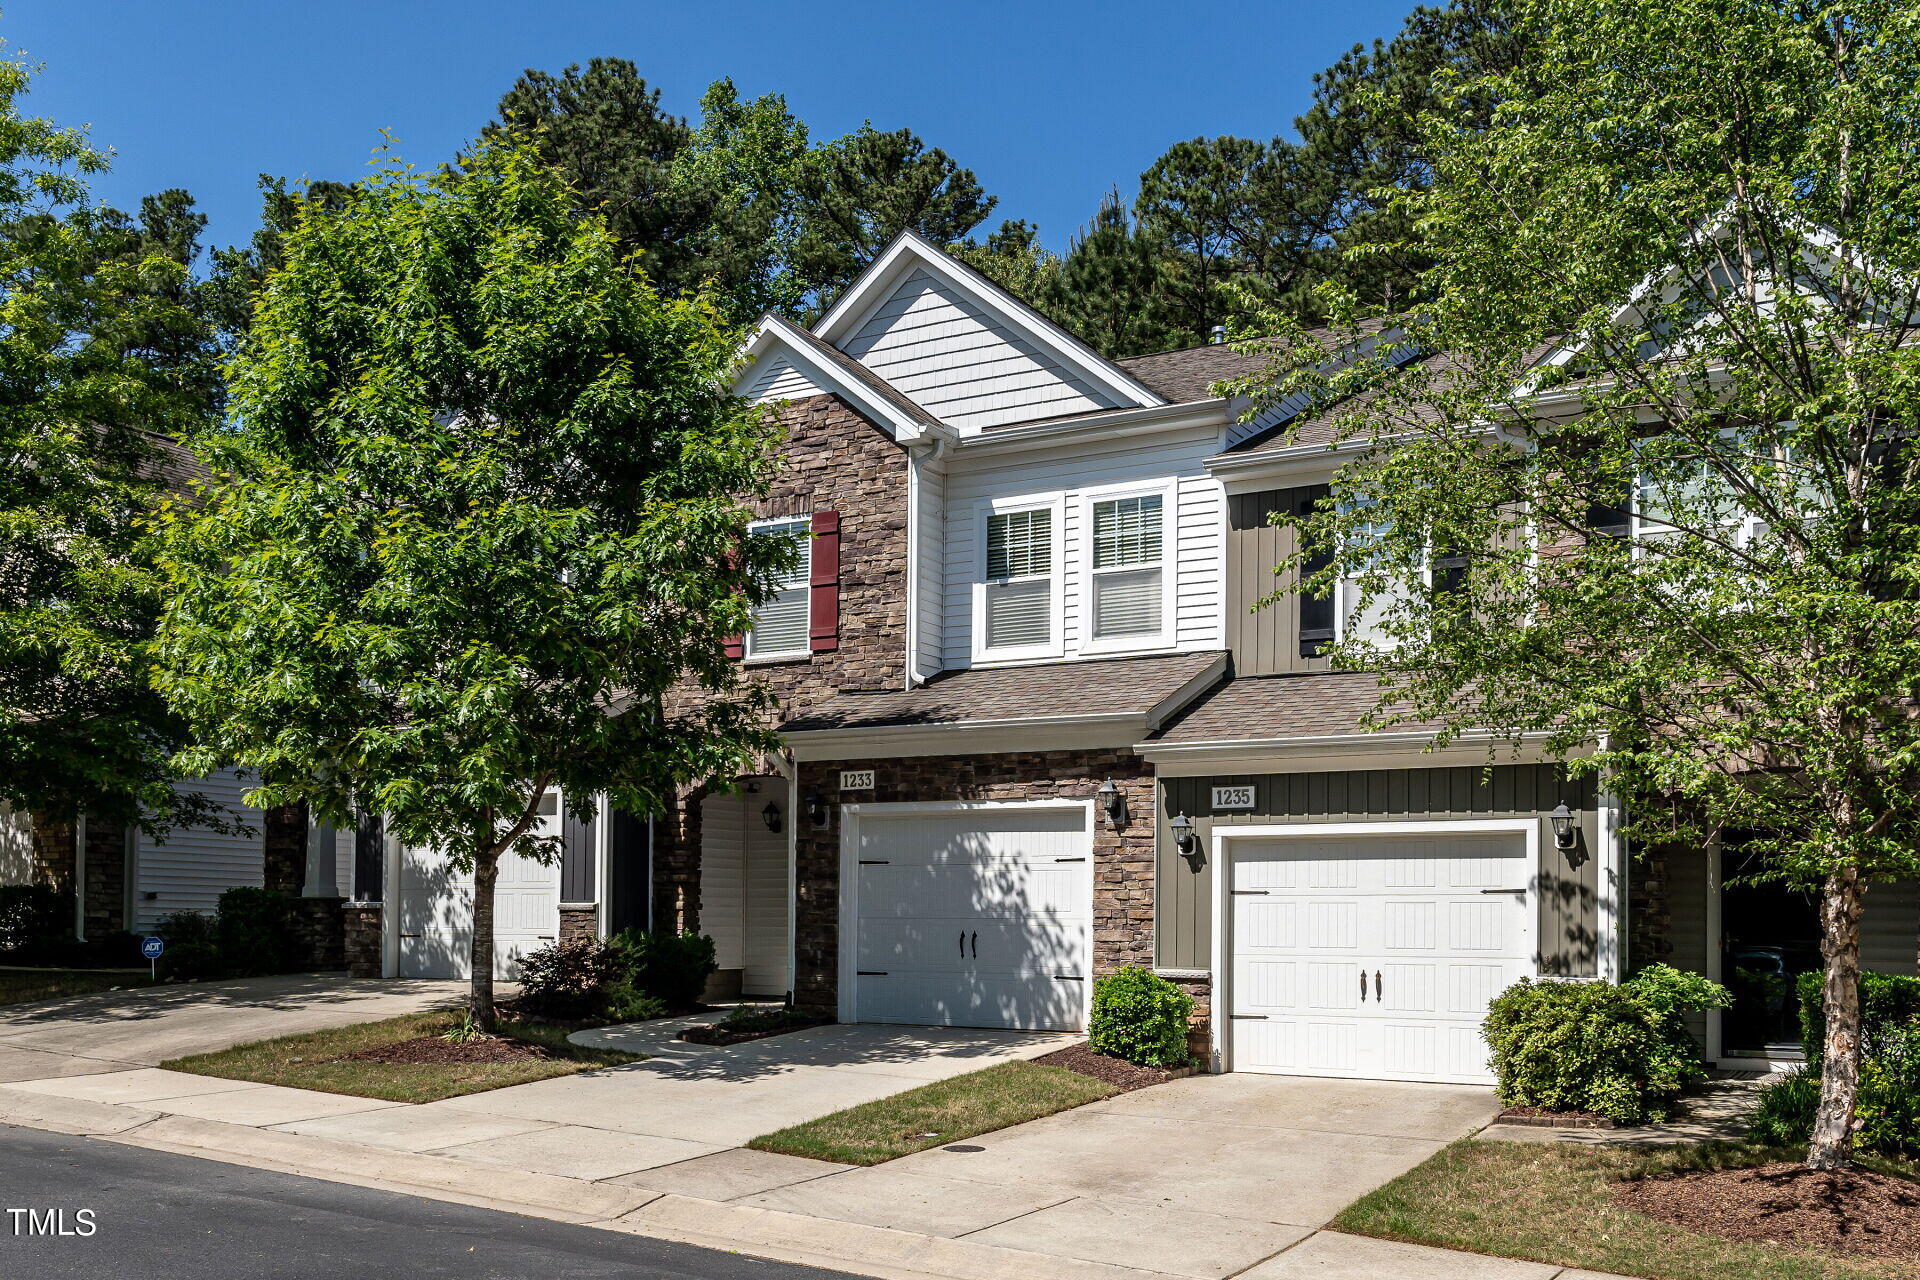 View Raleigh, NC 27606 townhome